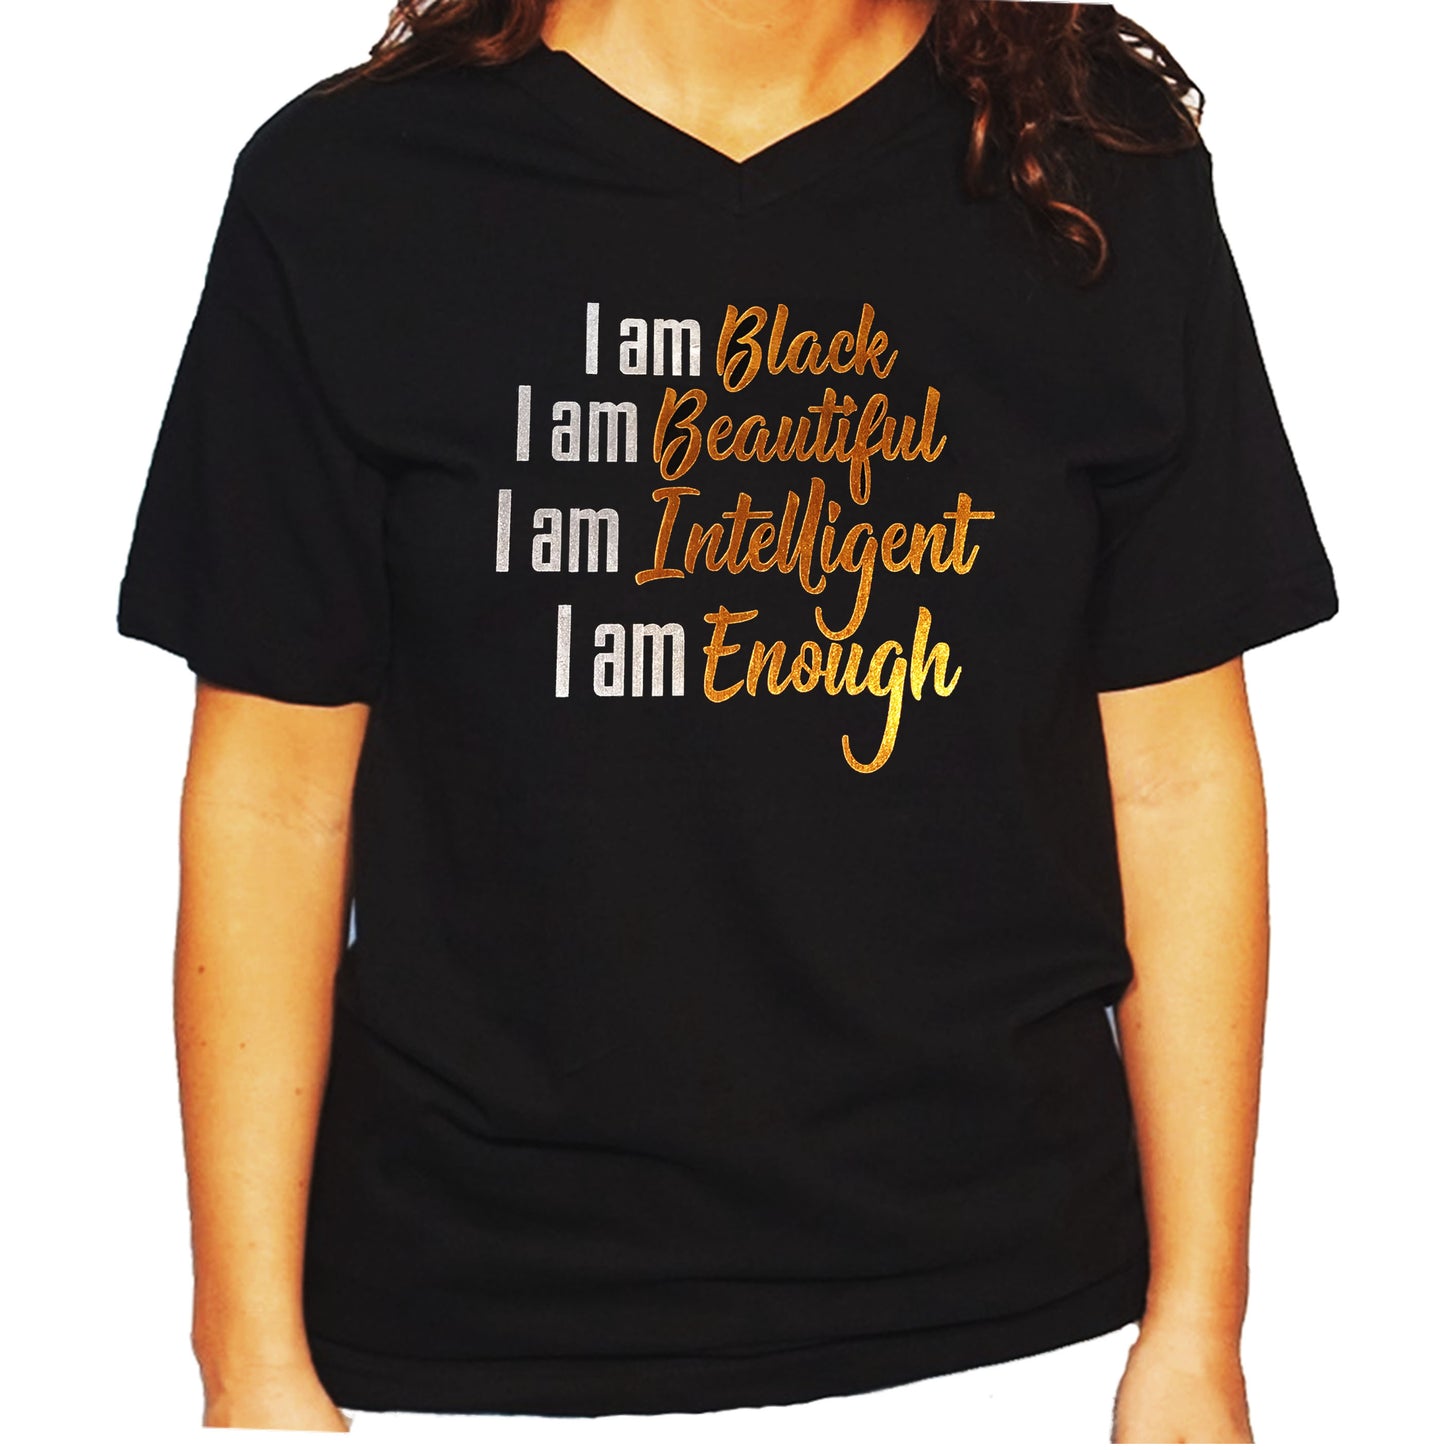 Women's / Unisex T-Shirt with I am Black I am Beautiful in Foil Print